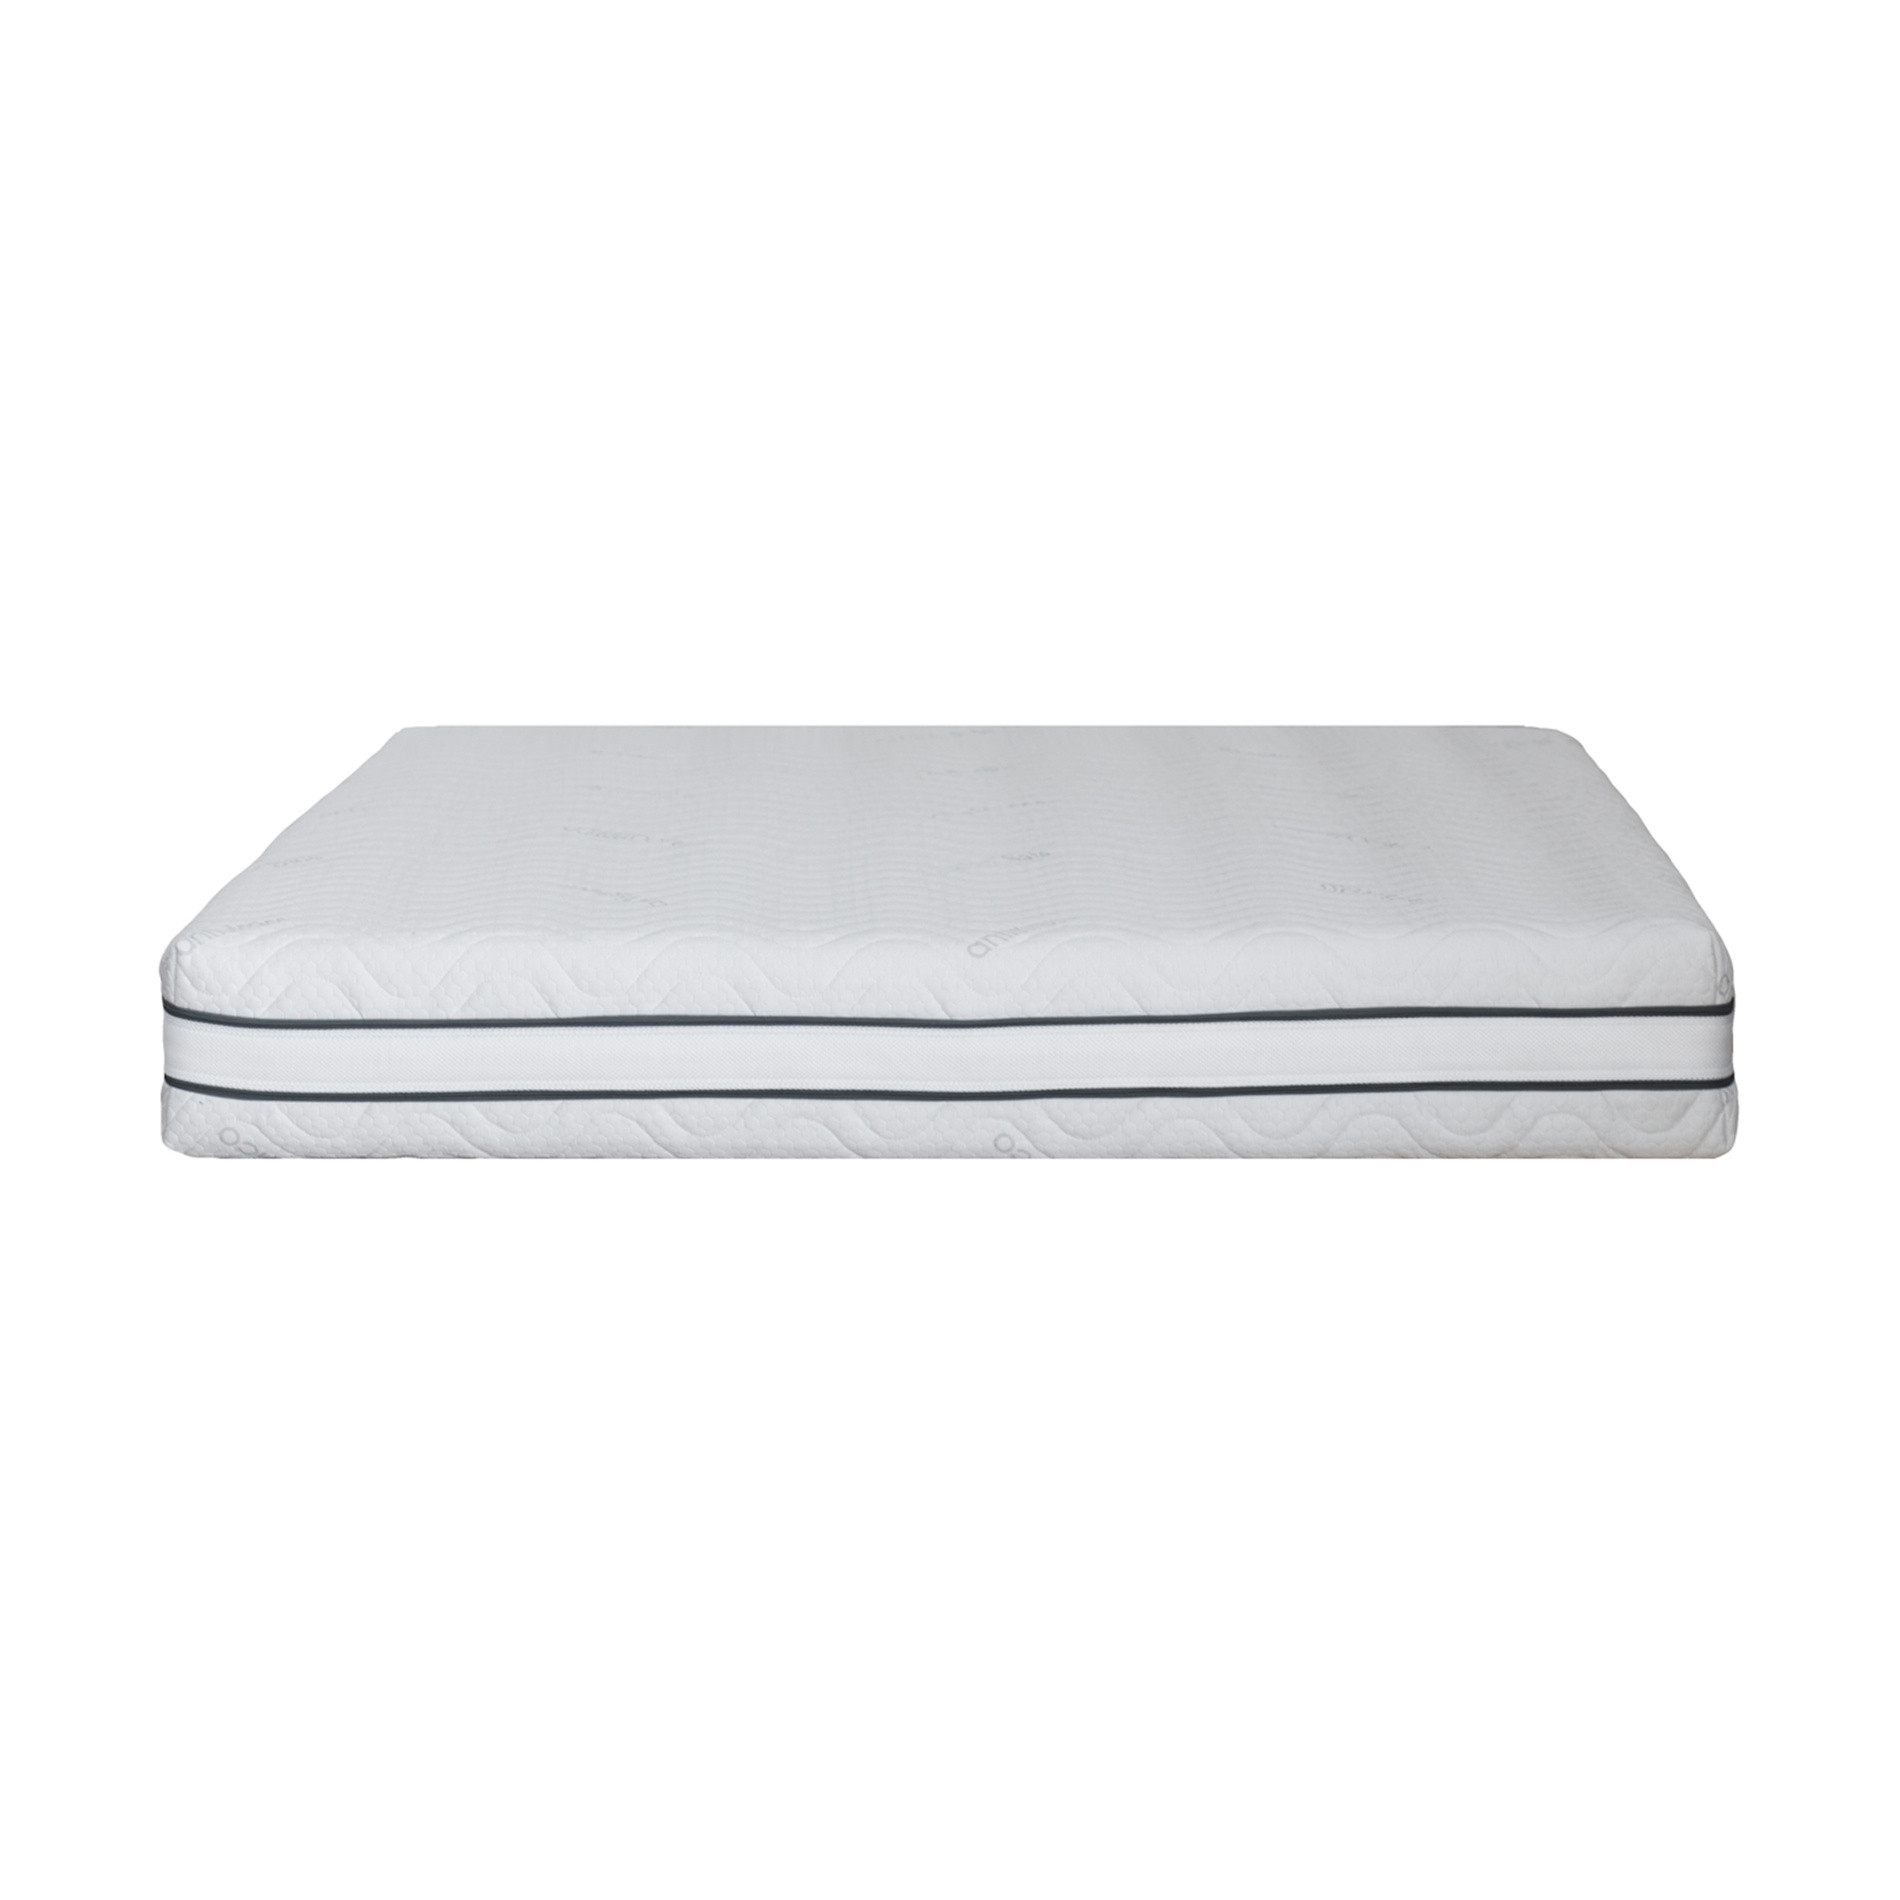 Two-season mattress with removable cover, White, large image number 1